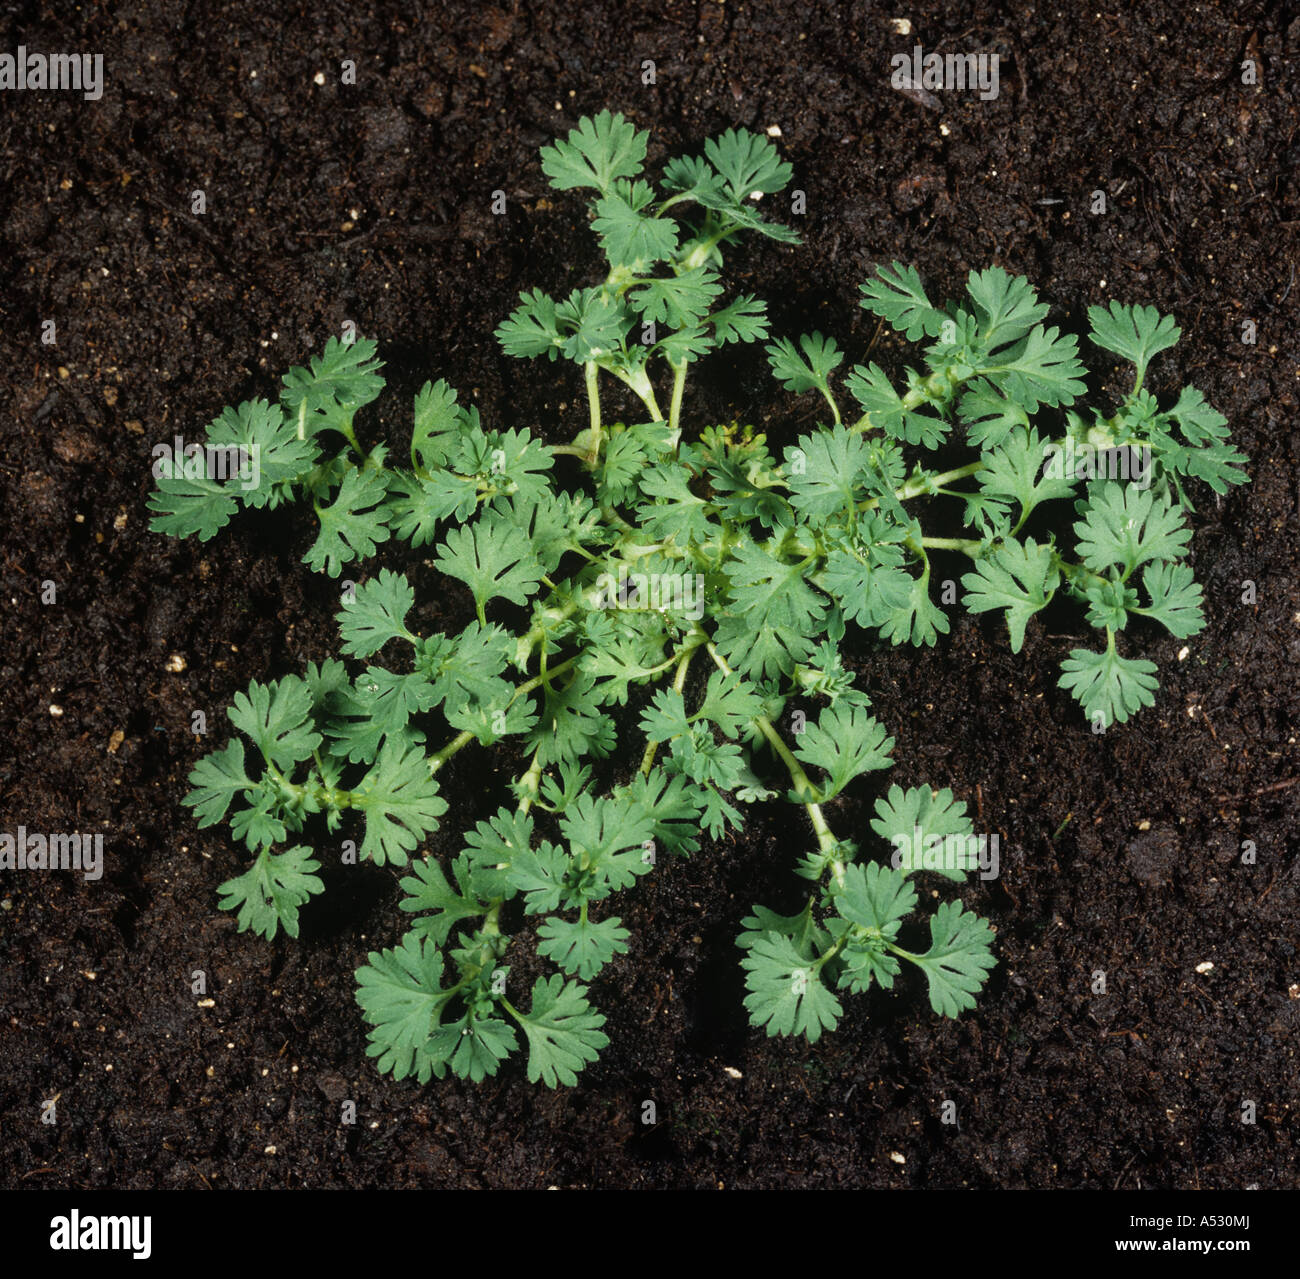 Parsley piert Aphanes arvensis young plant rosette Stock Photo